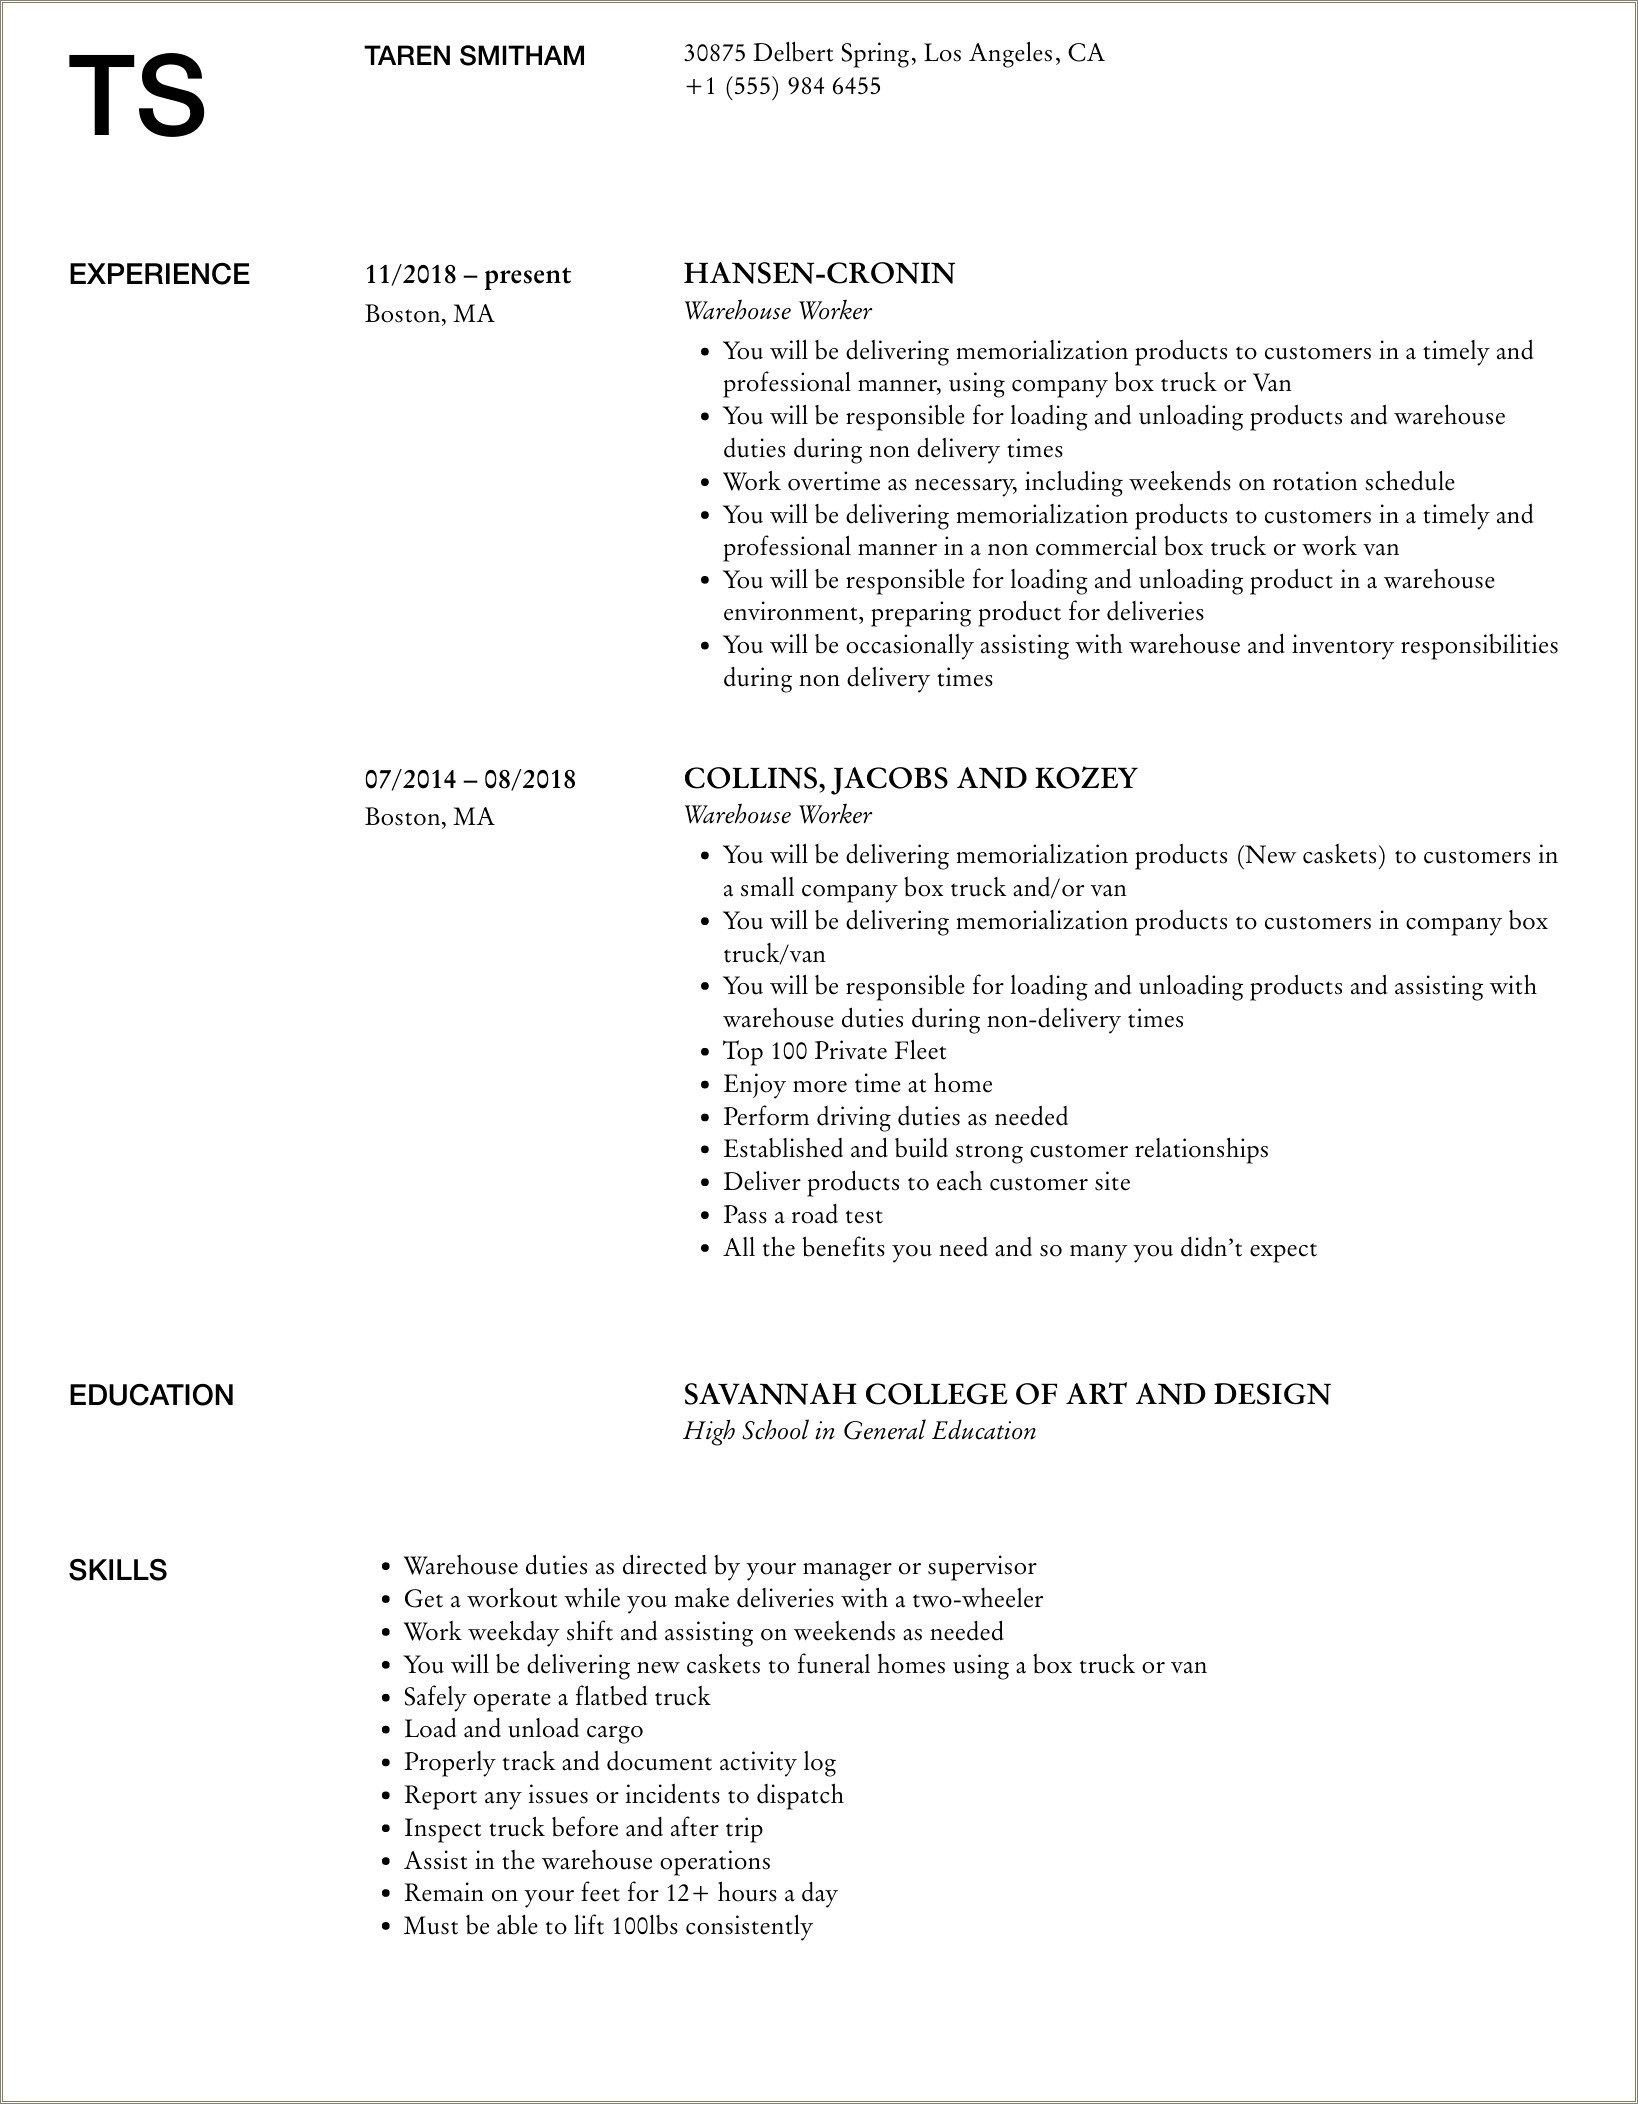 Samples Of Combination Resumes For Warehouse Production Positions